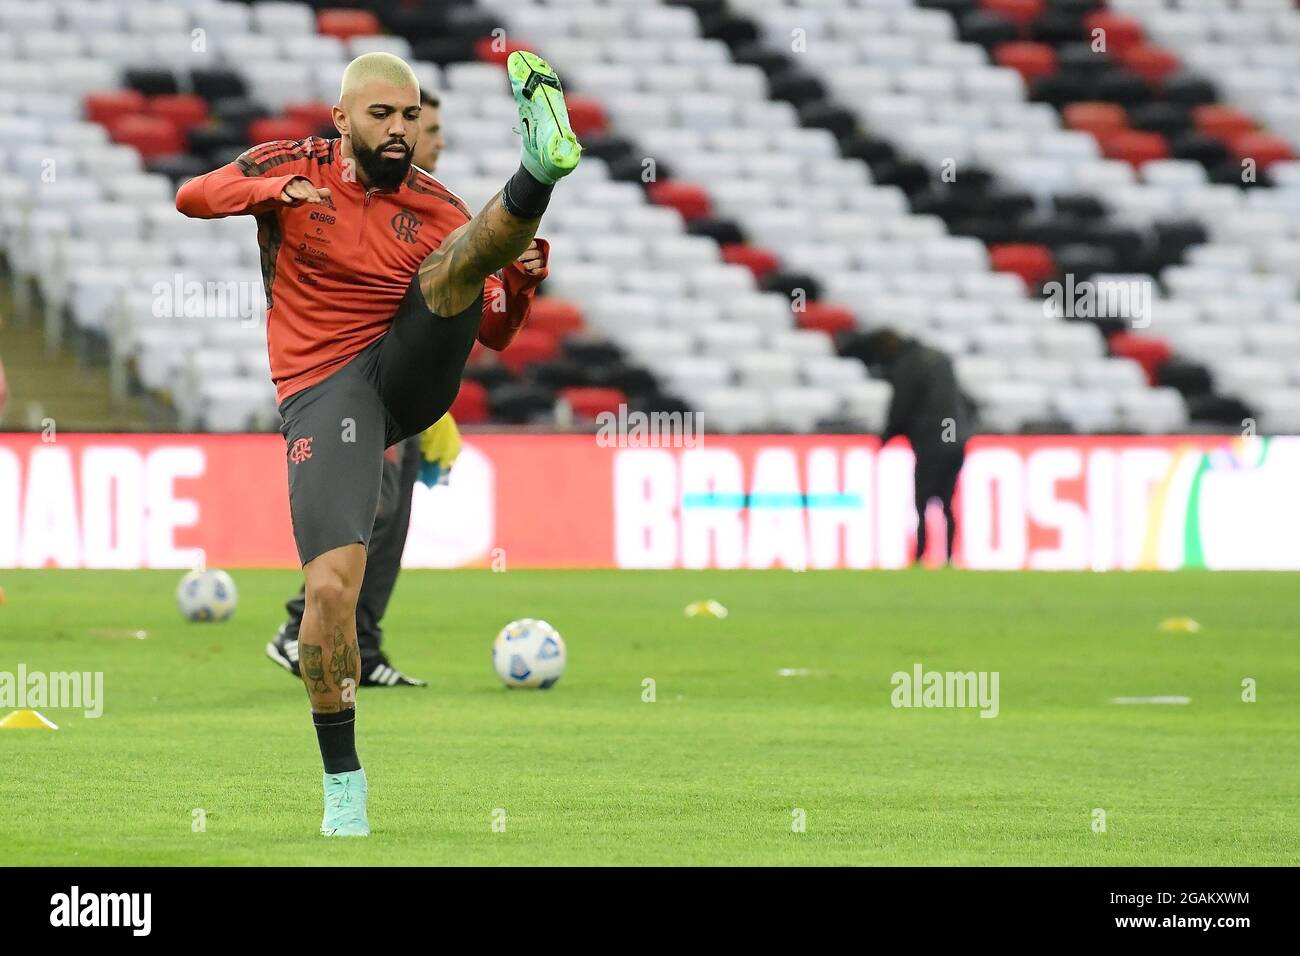 Rio de Janeiro, Brazil, July 29, 2021. Soccer player, Gabriel Gabigol from Flamengo team, during the warm-up before the Flamengo x ABC game, for the B Stock Photo